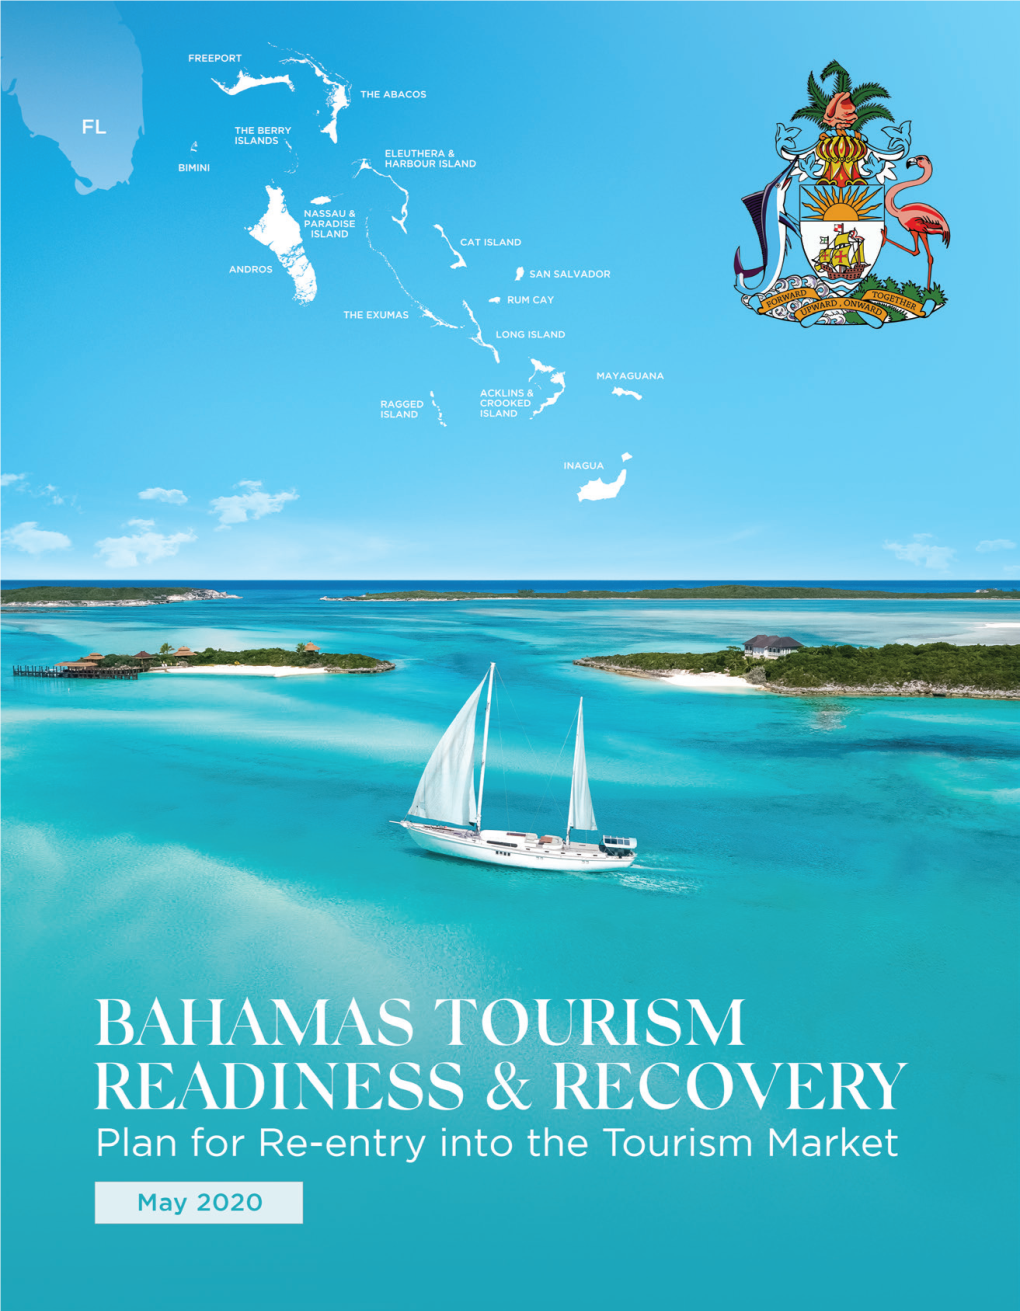 Bahamas Tourism & Readiness Recovery Plan